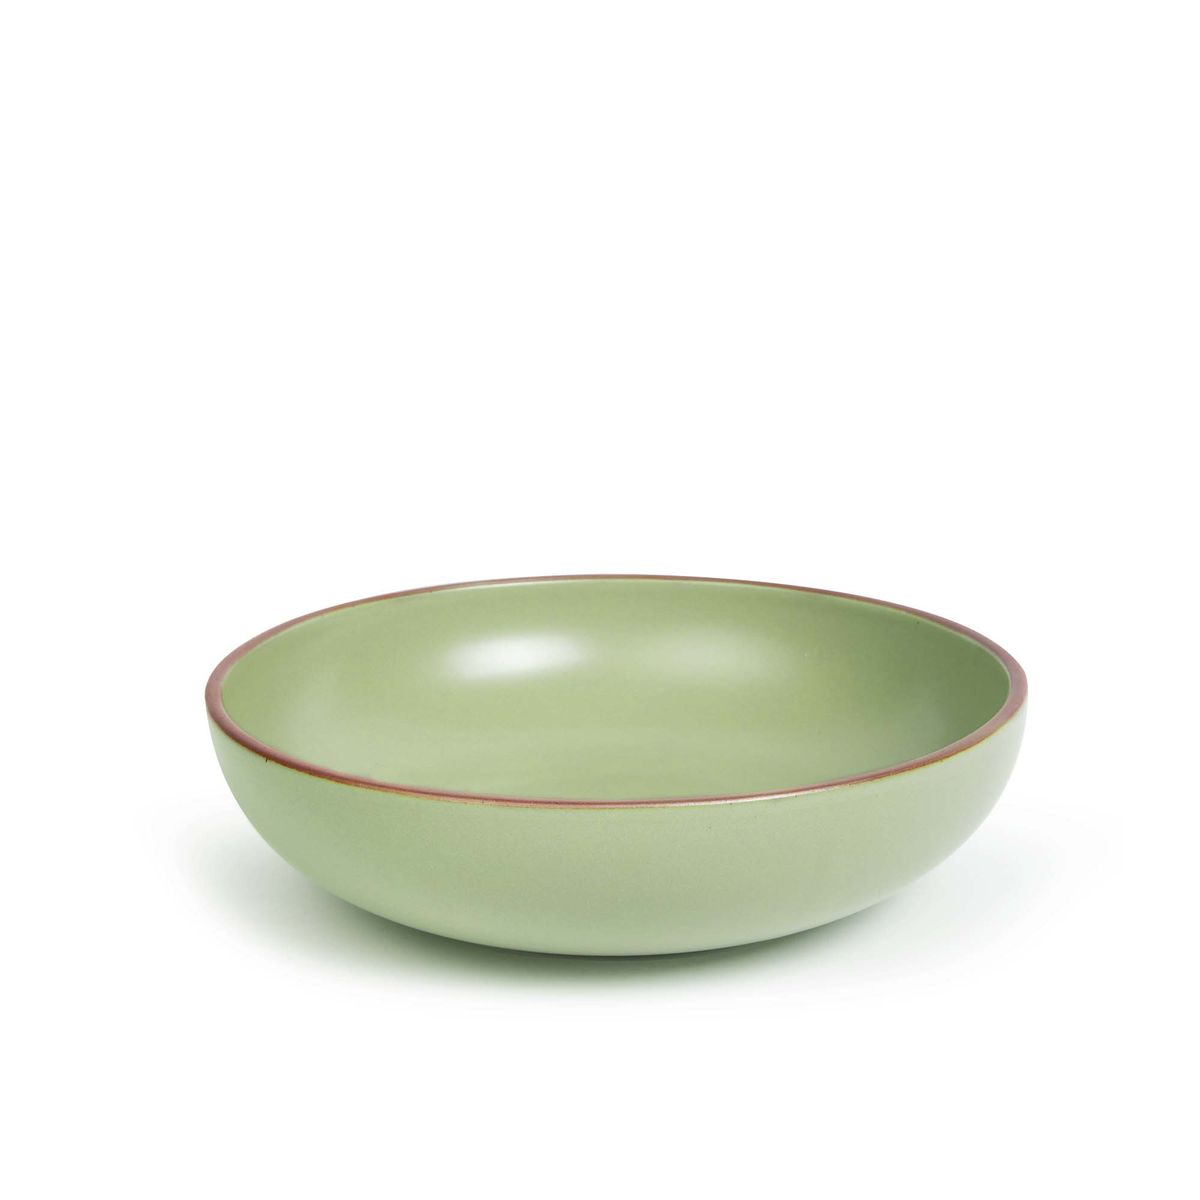 A large shallow serving ceramic bowl in a calming sage green color featuring iron speckles and an unglazed rim.